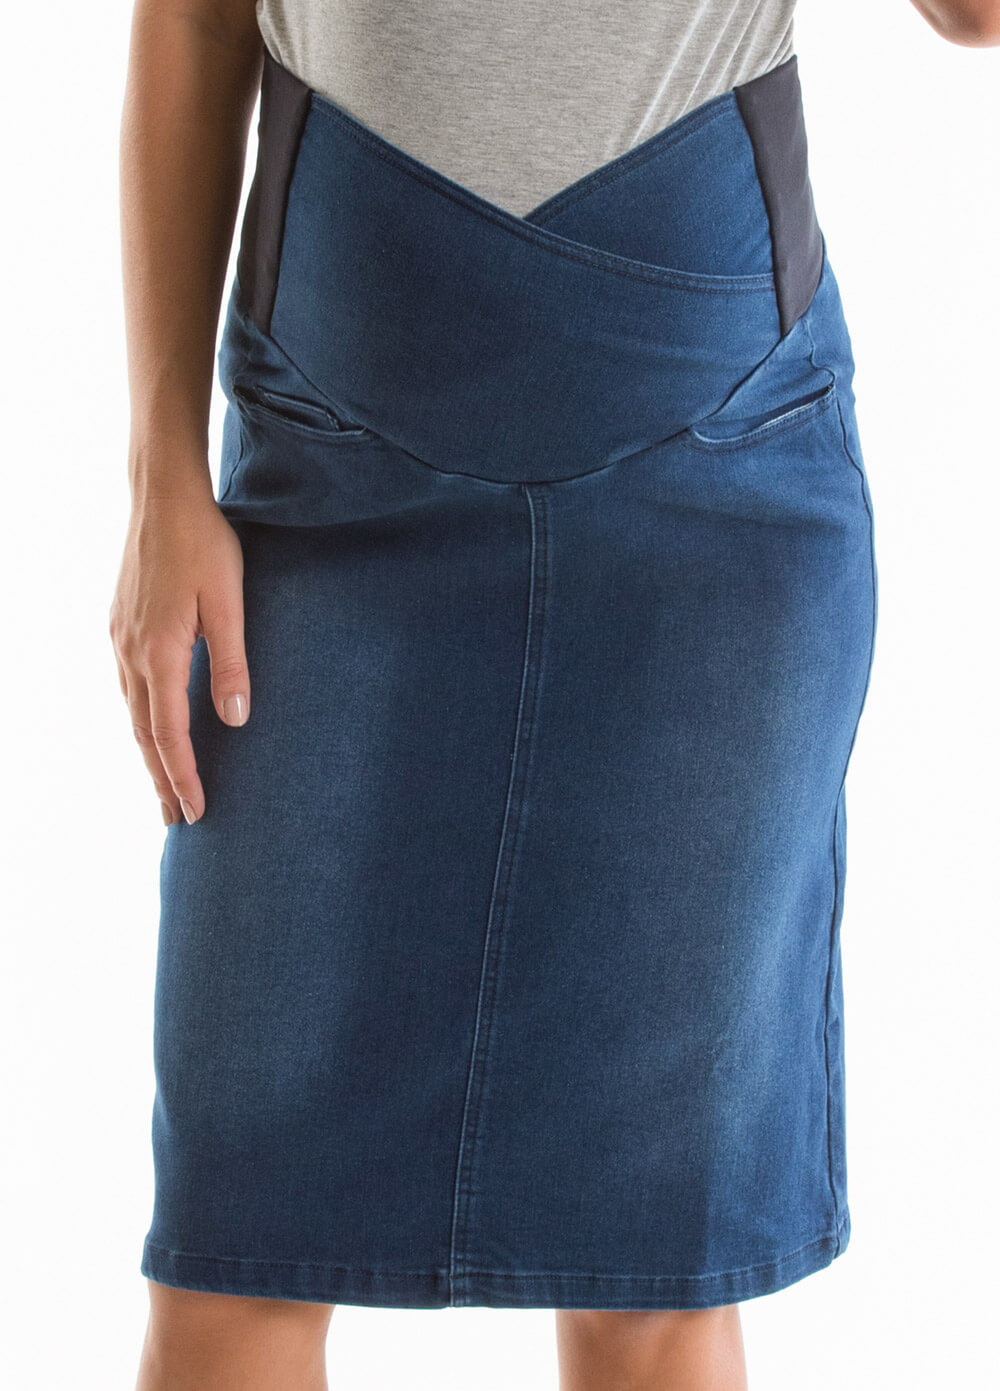 Maternity Denim Skirt in Blue Wash by Queen Bee 